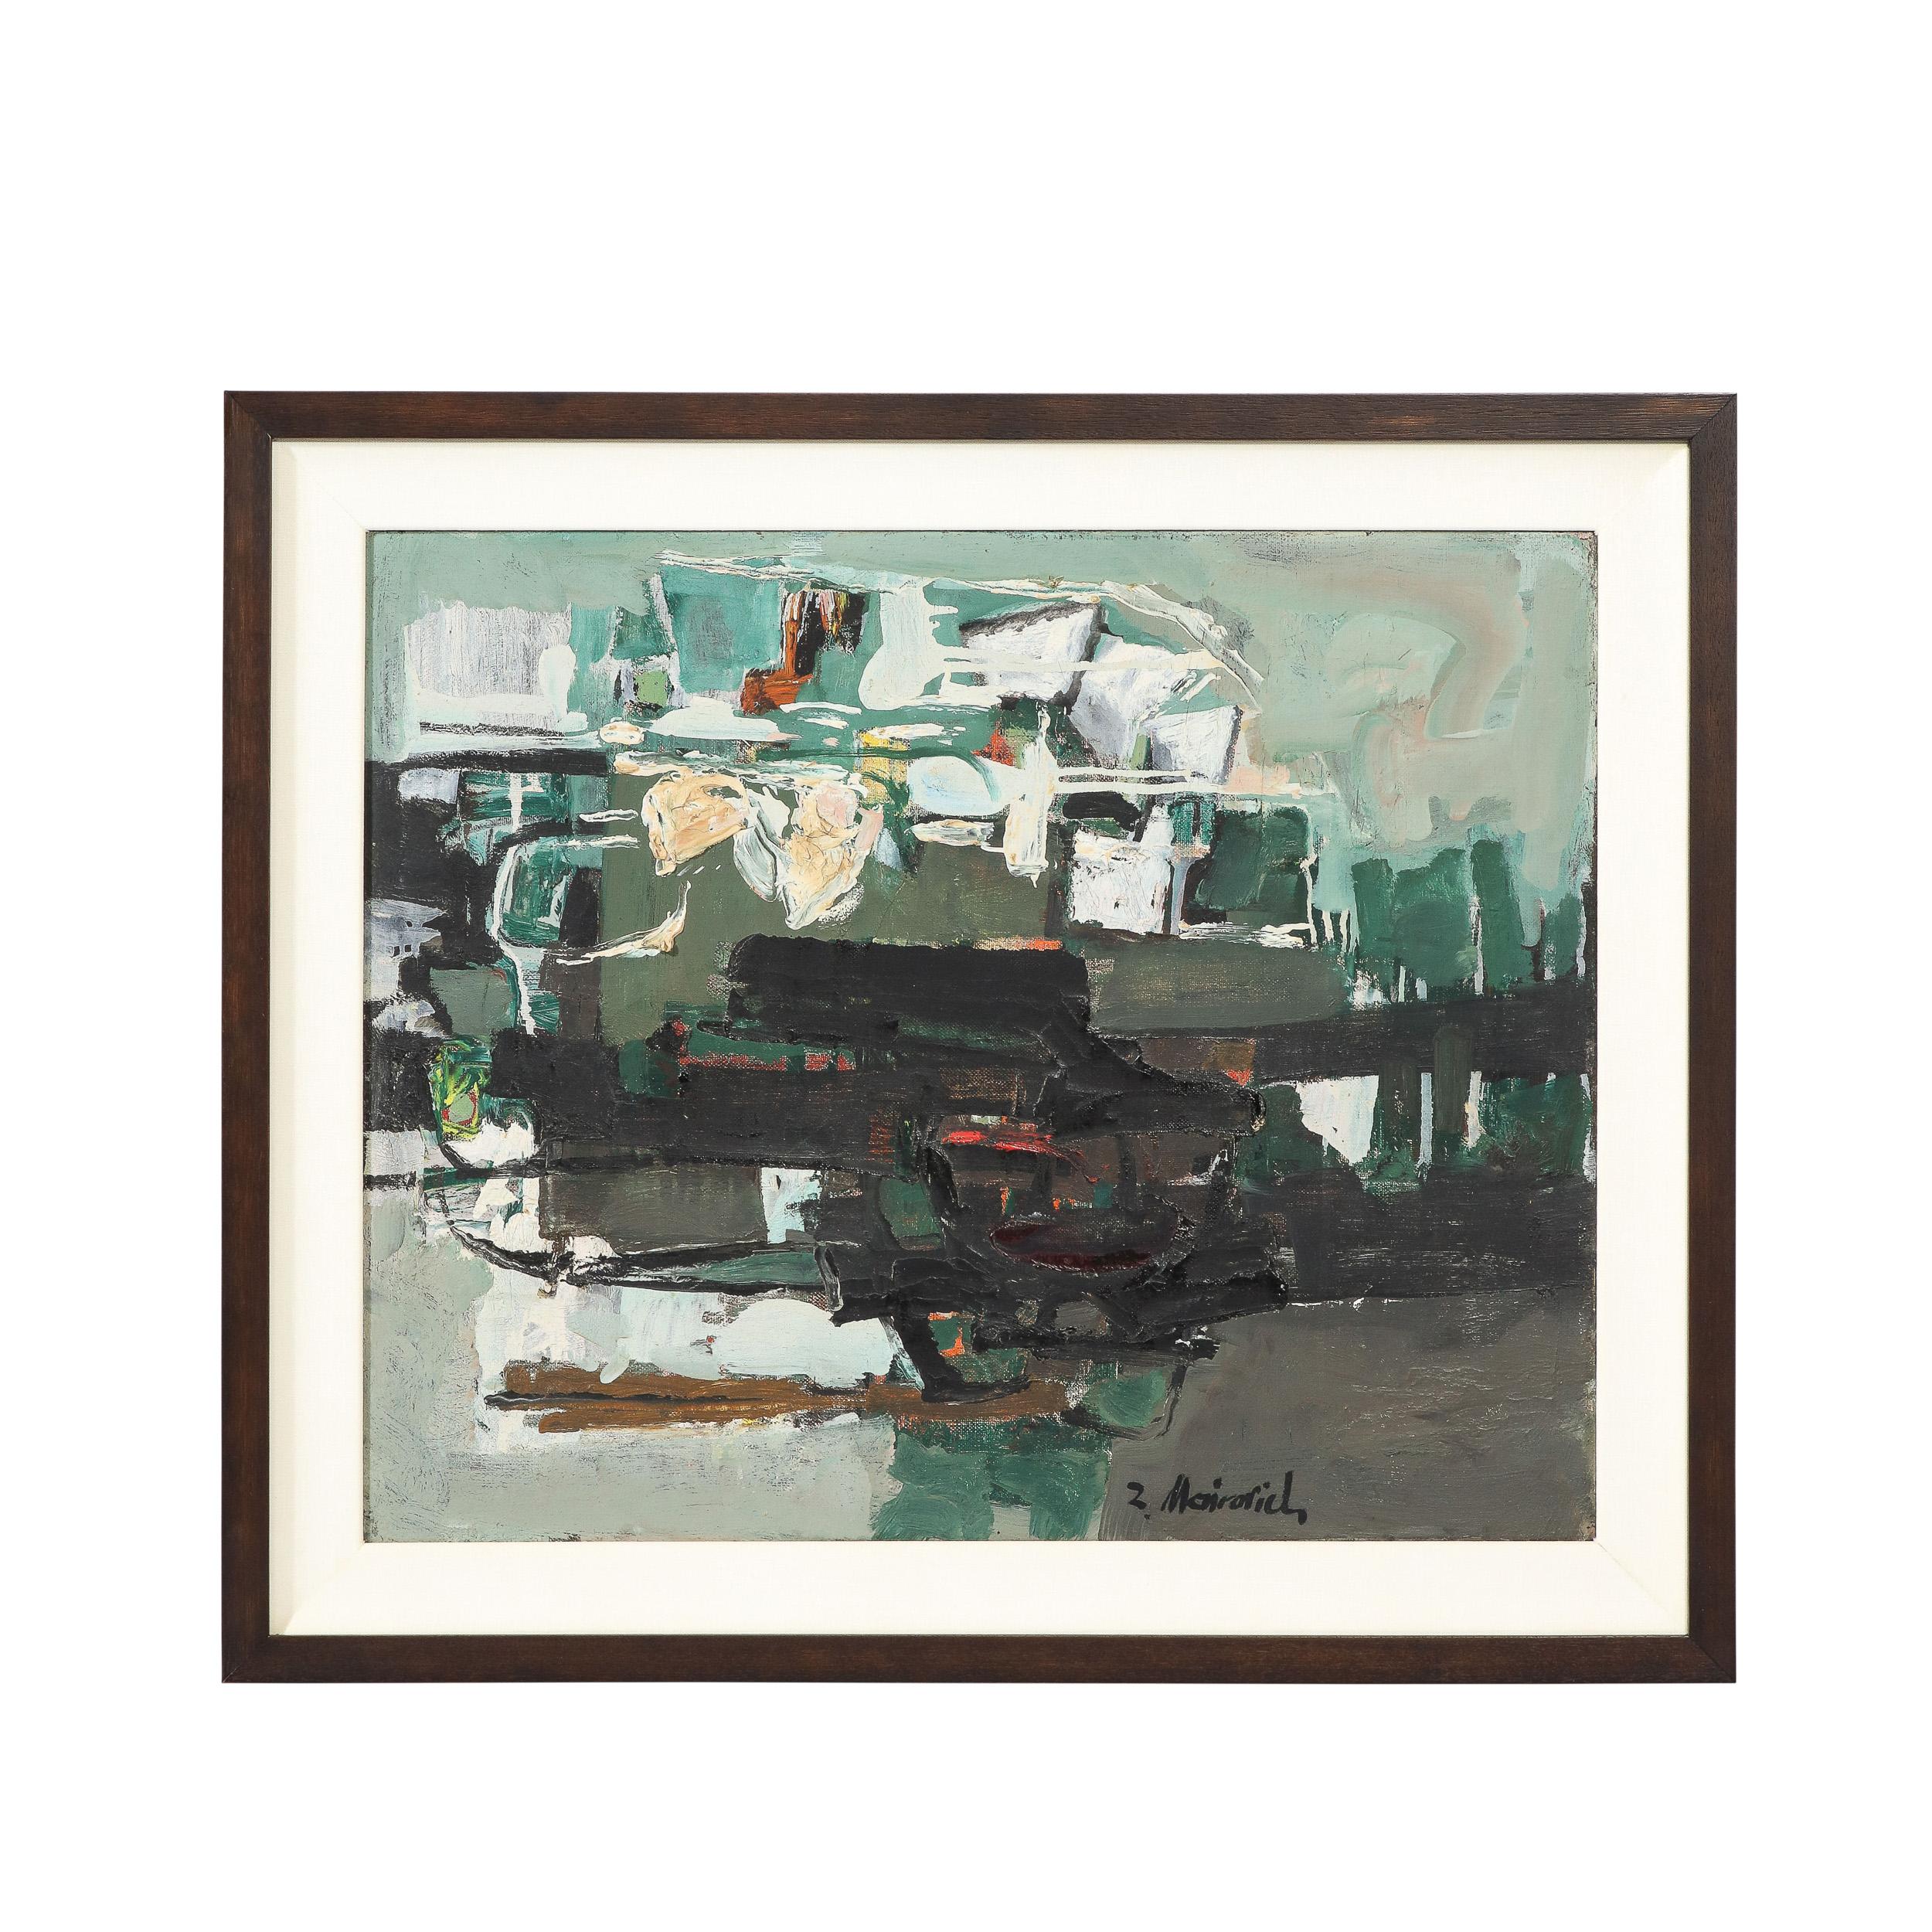 This Untitled Abstract Composition signed by the Polish Born artist Zvi Mairovich, originating from Haifa Israel, Circa 1950. Features a highly gestural abstracted landscape in hues of muted blue greens, whites, and deep blacks with flashes of reds